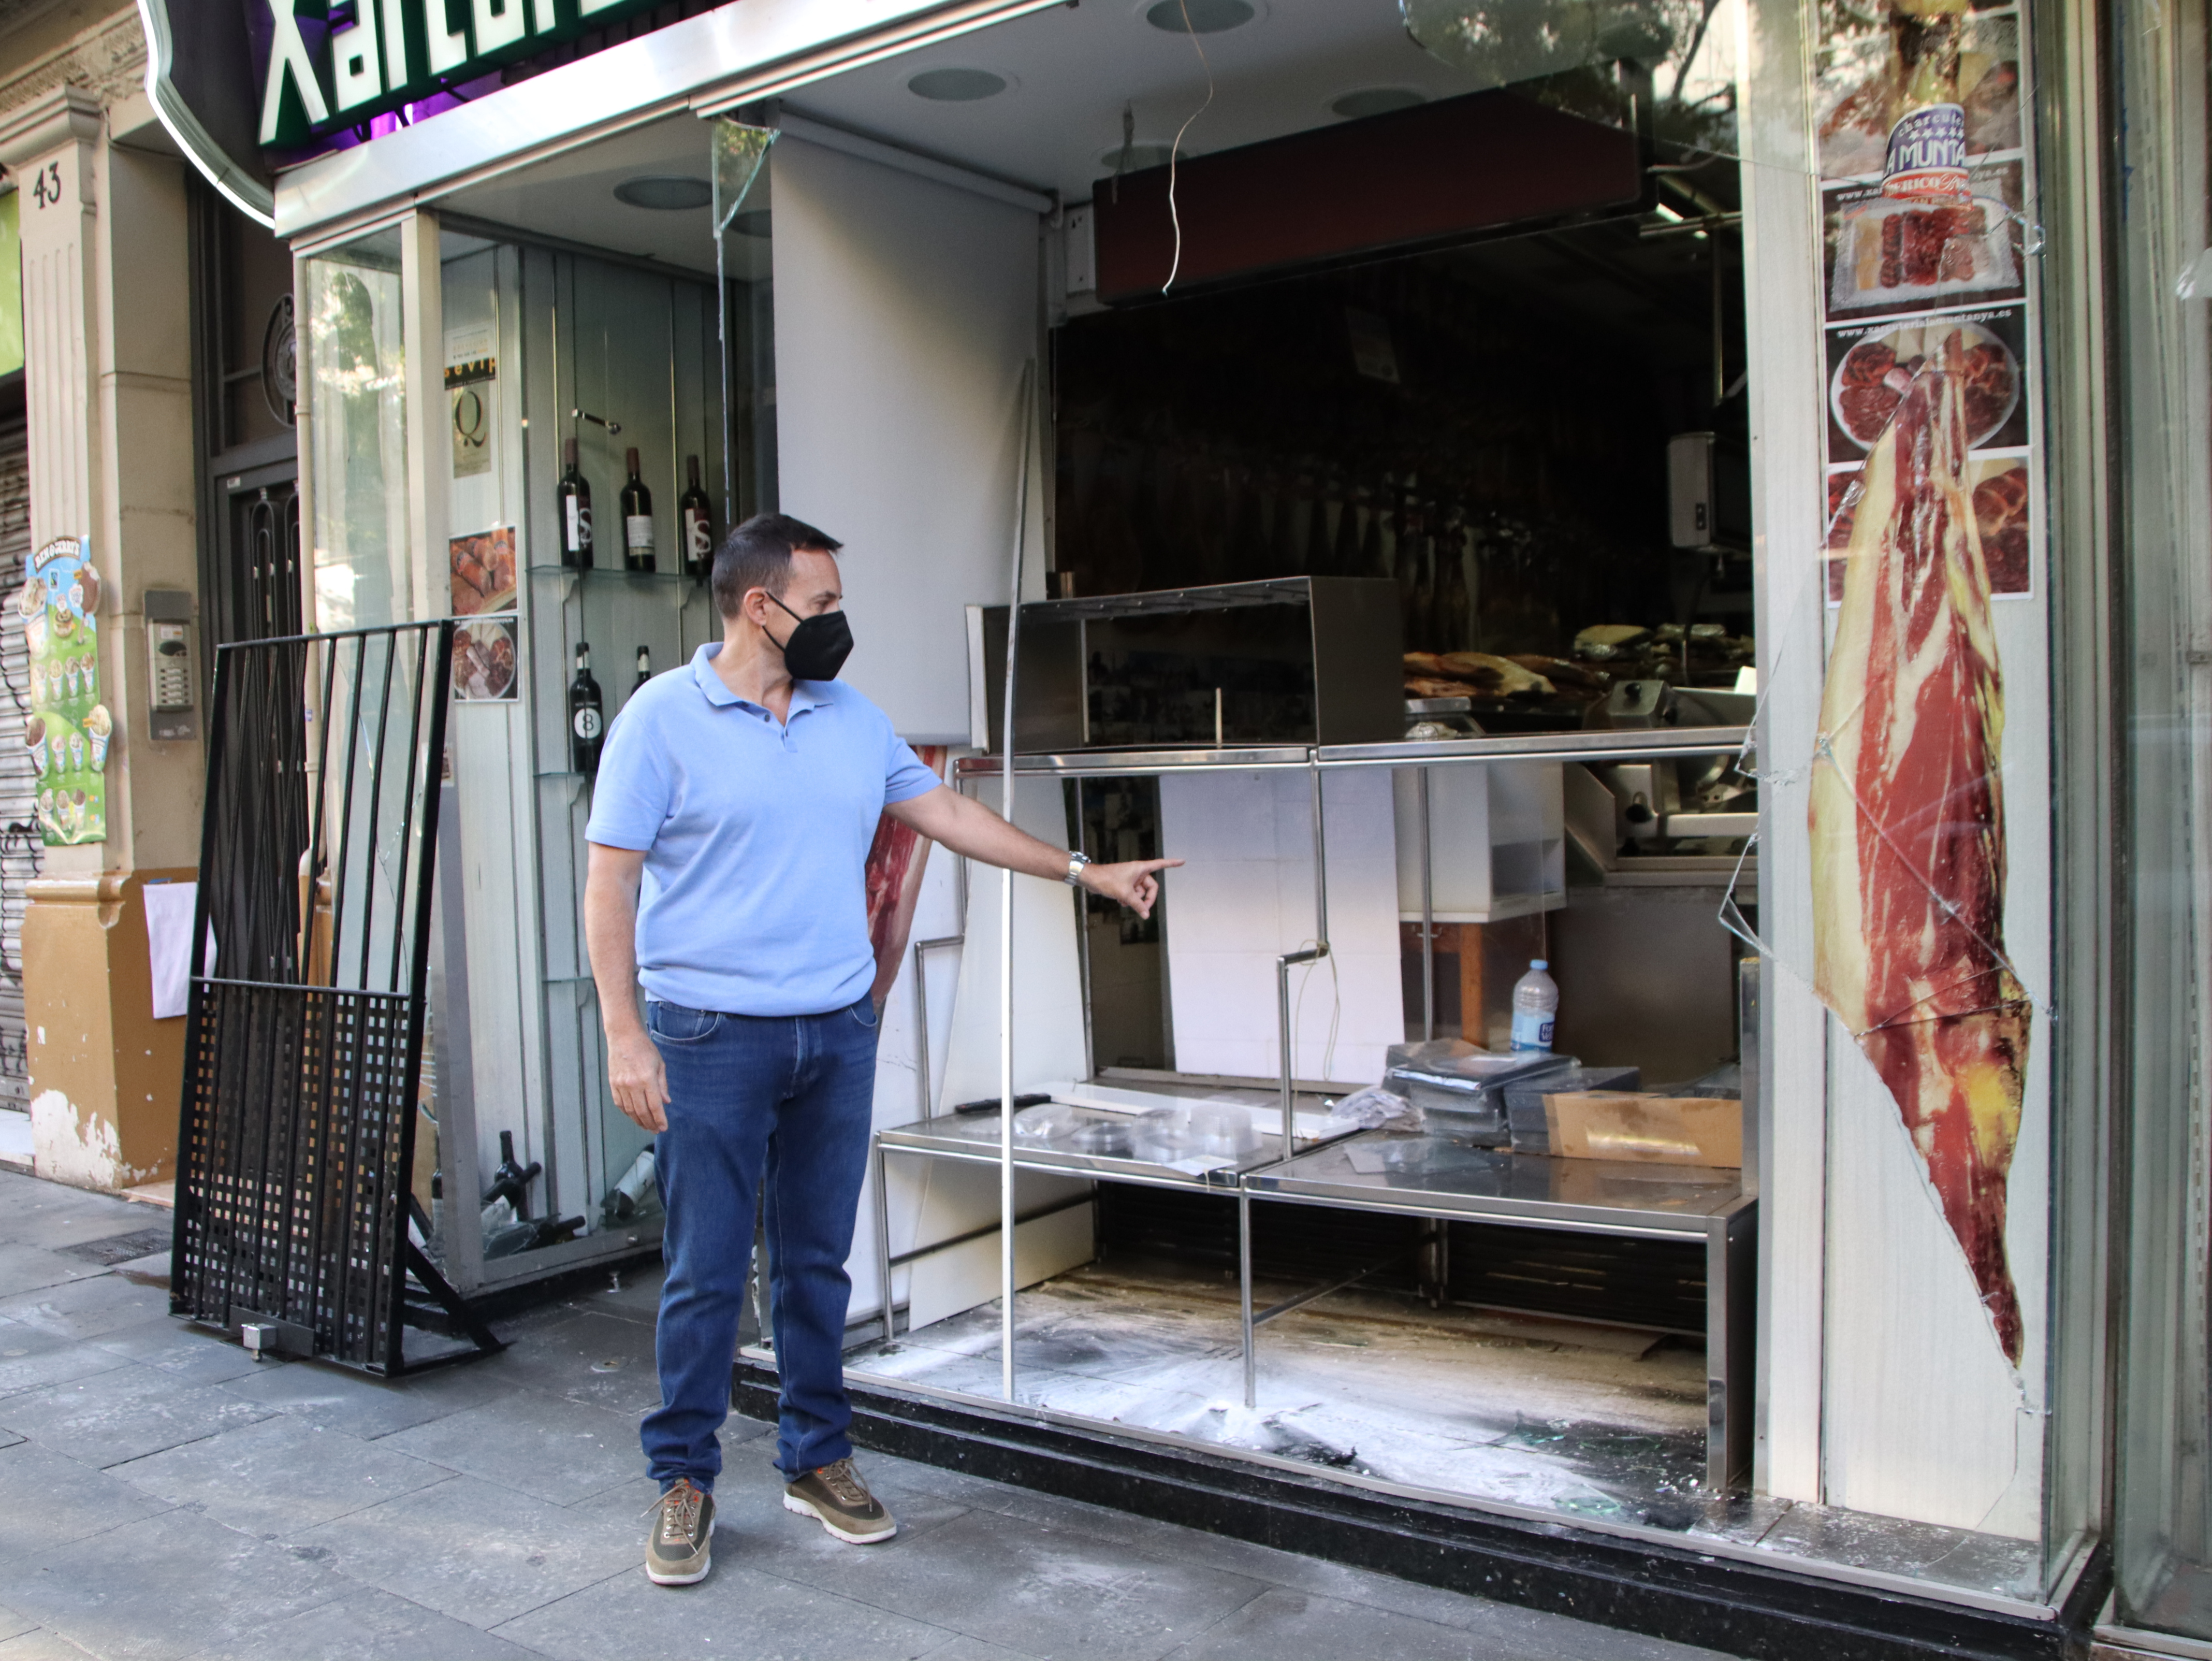 Sergio, the son of the La Muntanya charcuterie owner on Barcelona's Creu Coberta street, points at windows destroyed by La Mercè looters